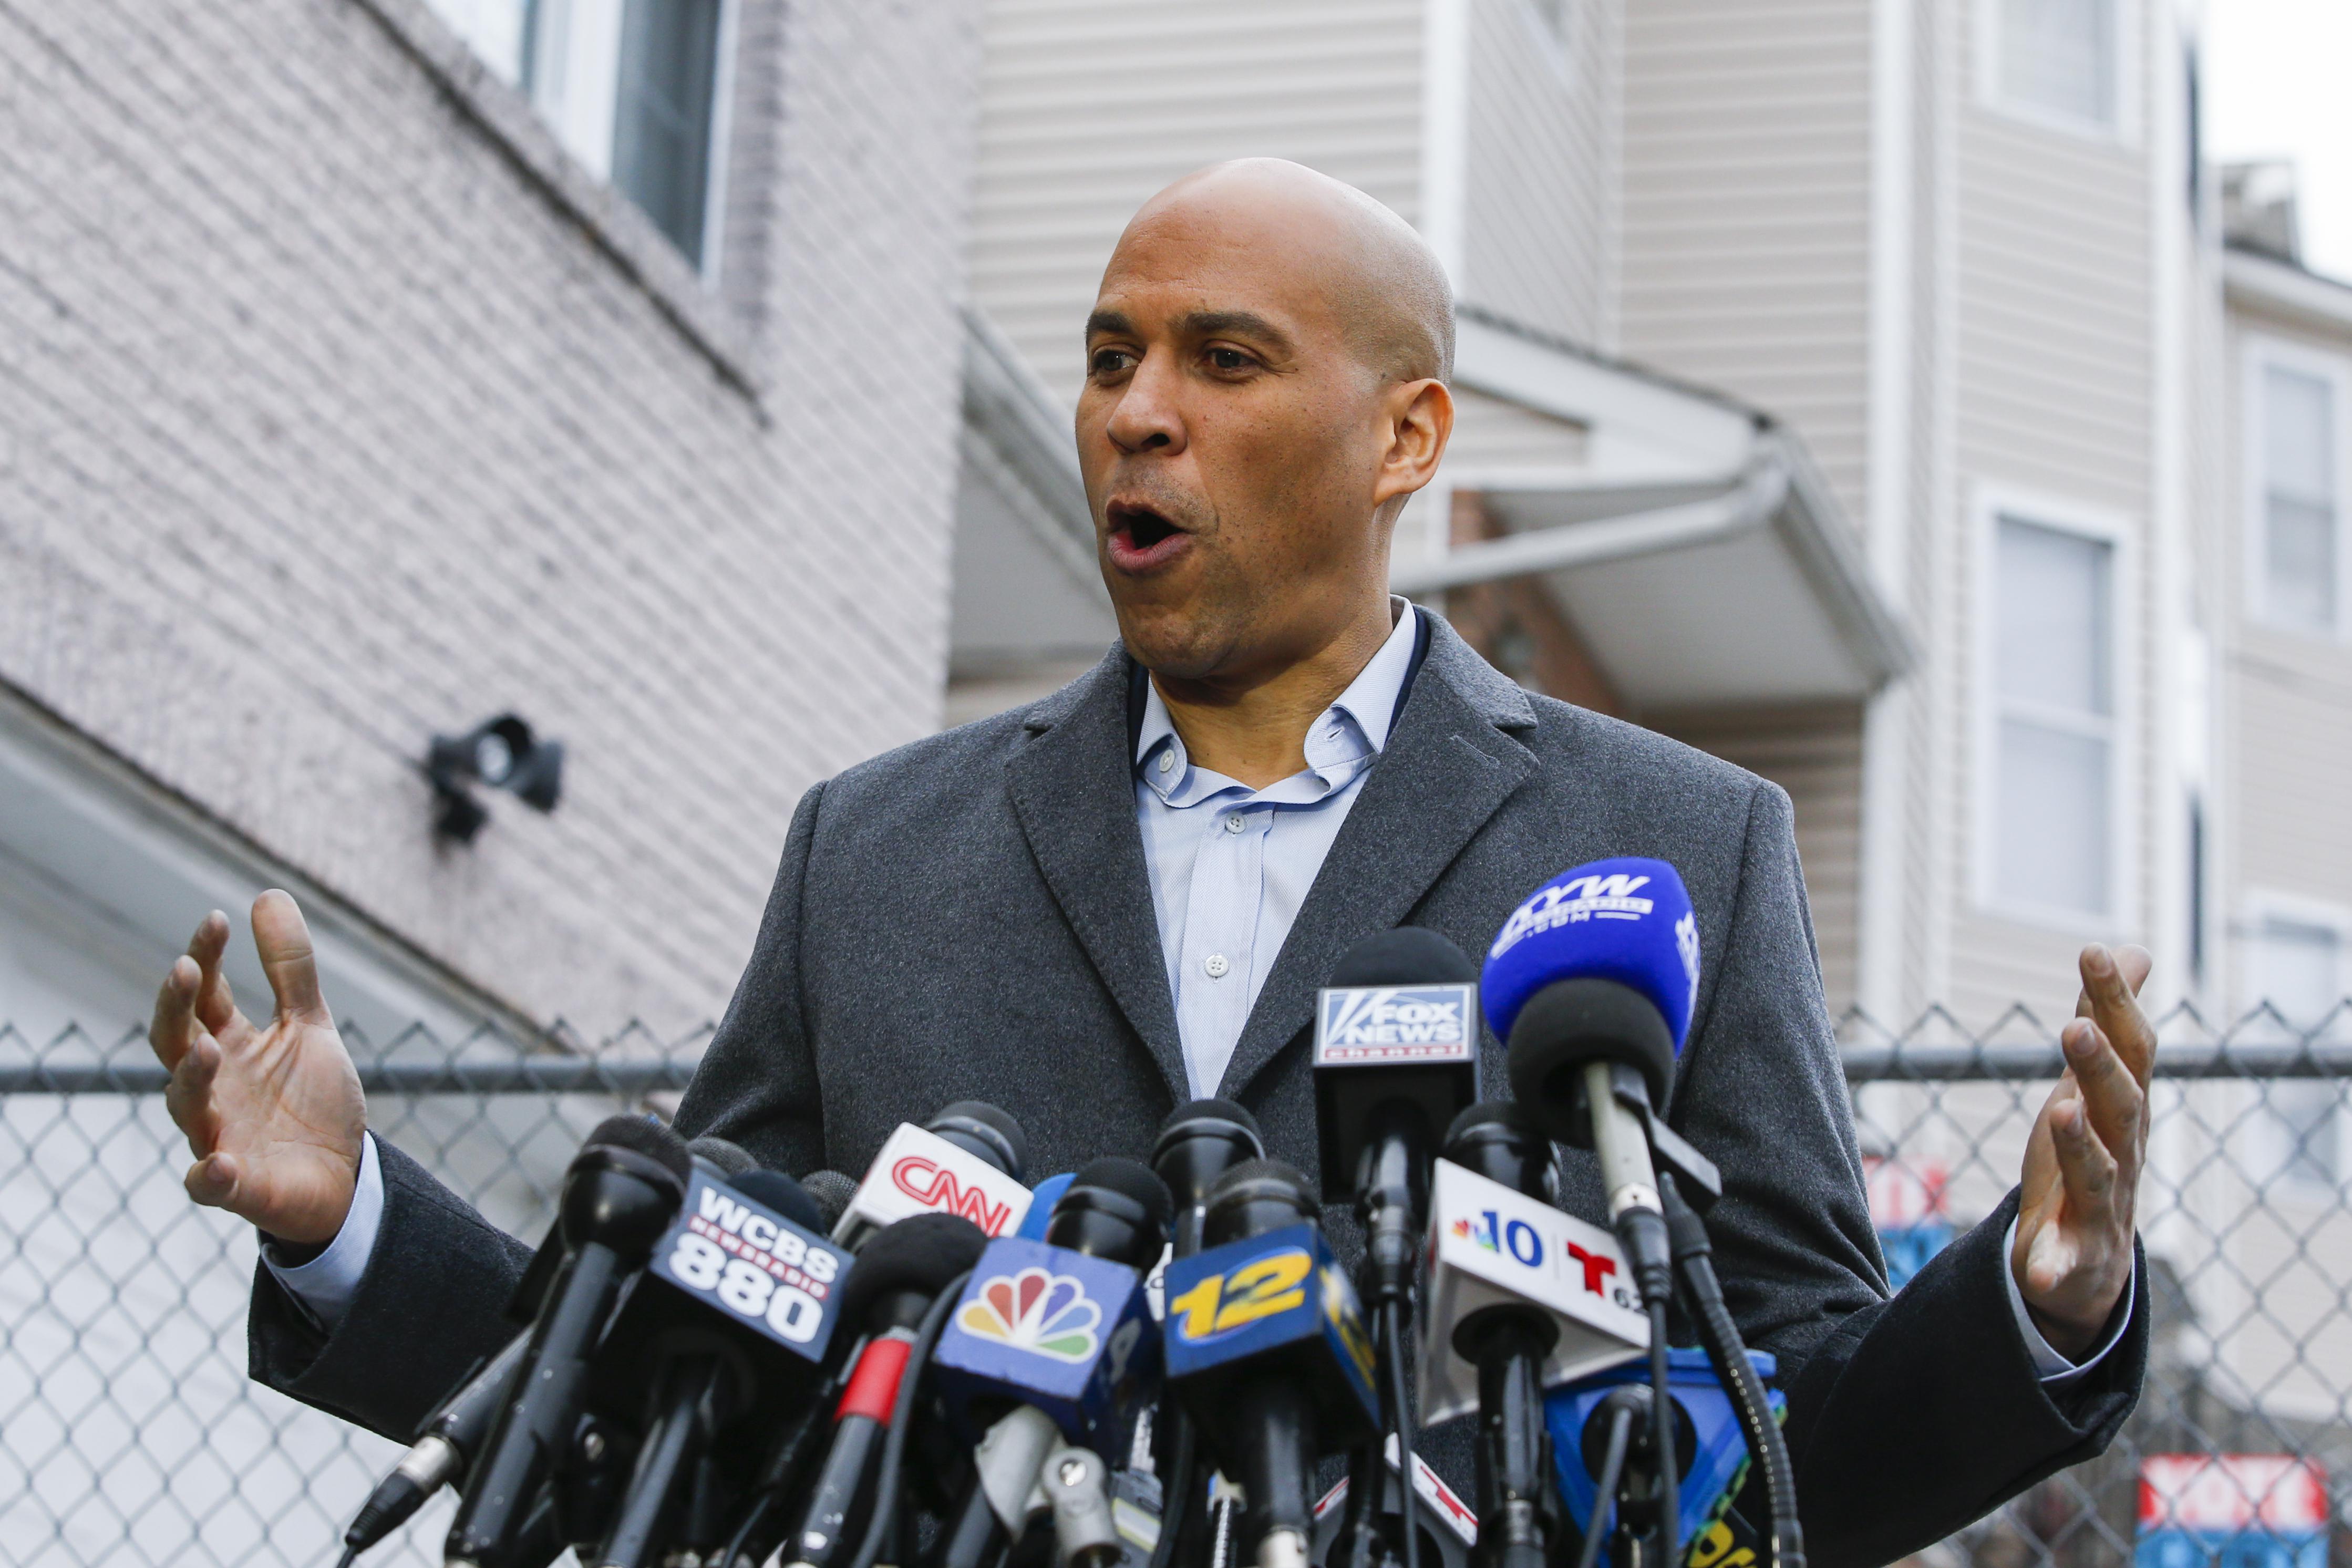 New Jersey Sen. Cory Booker announces his presidential bid during a press conference on Friday in Newark.